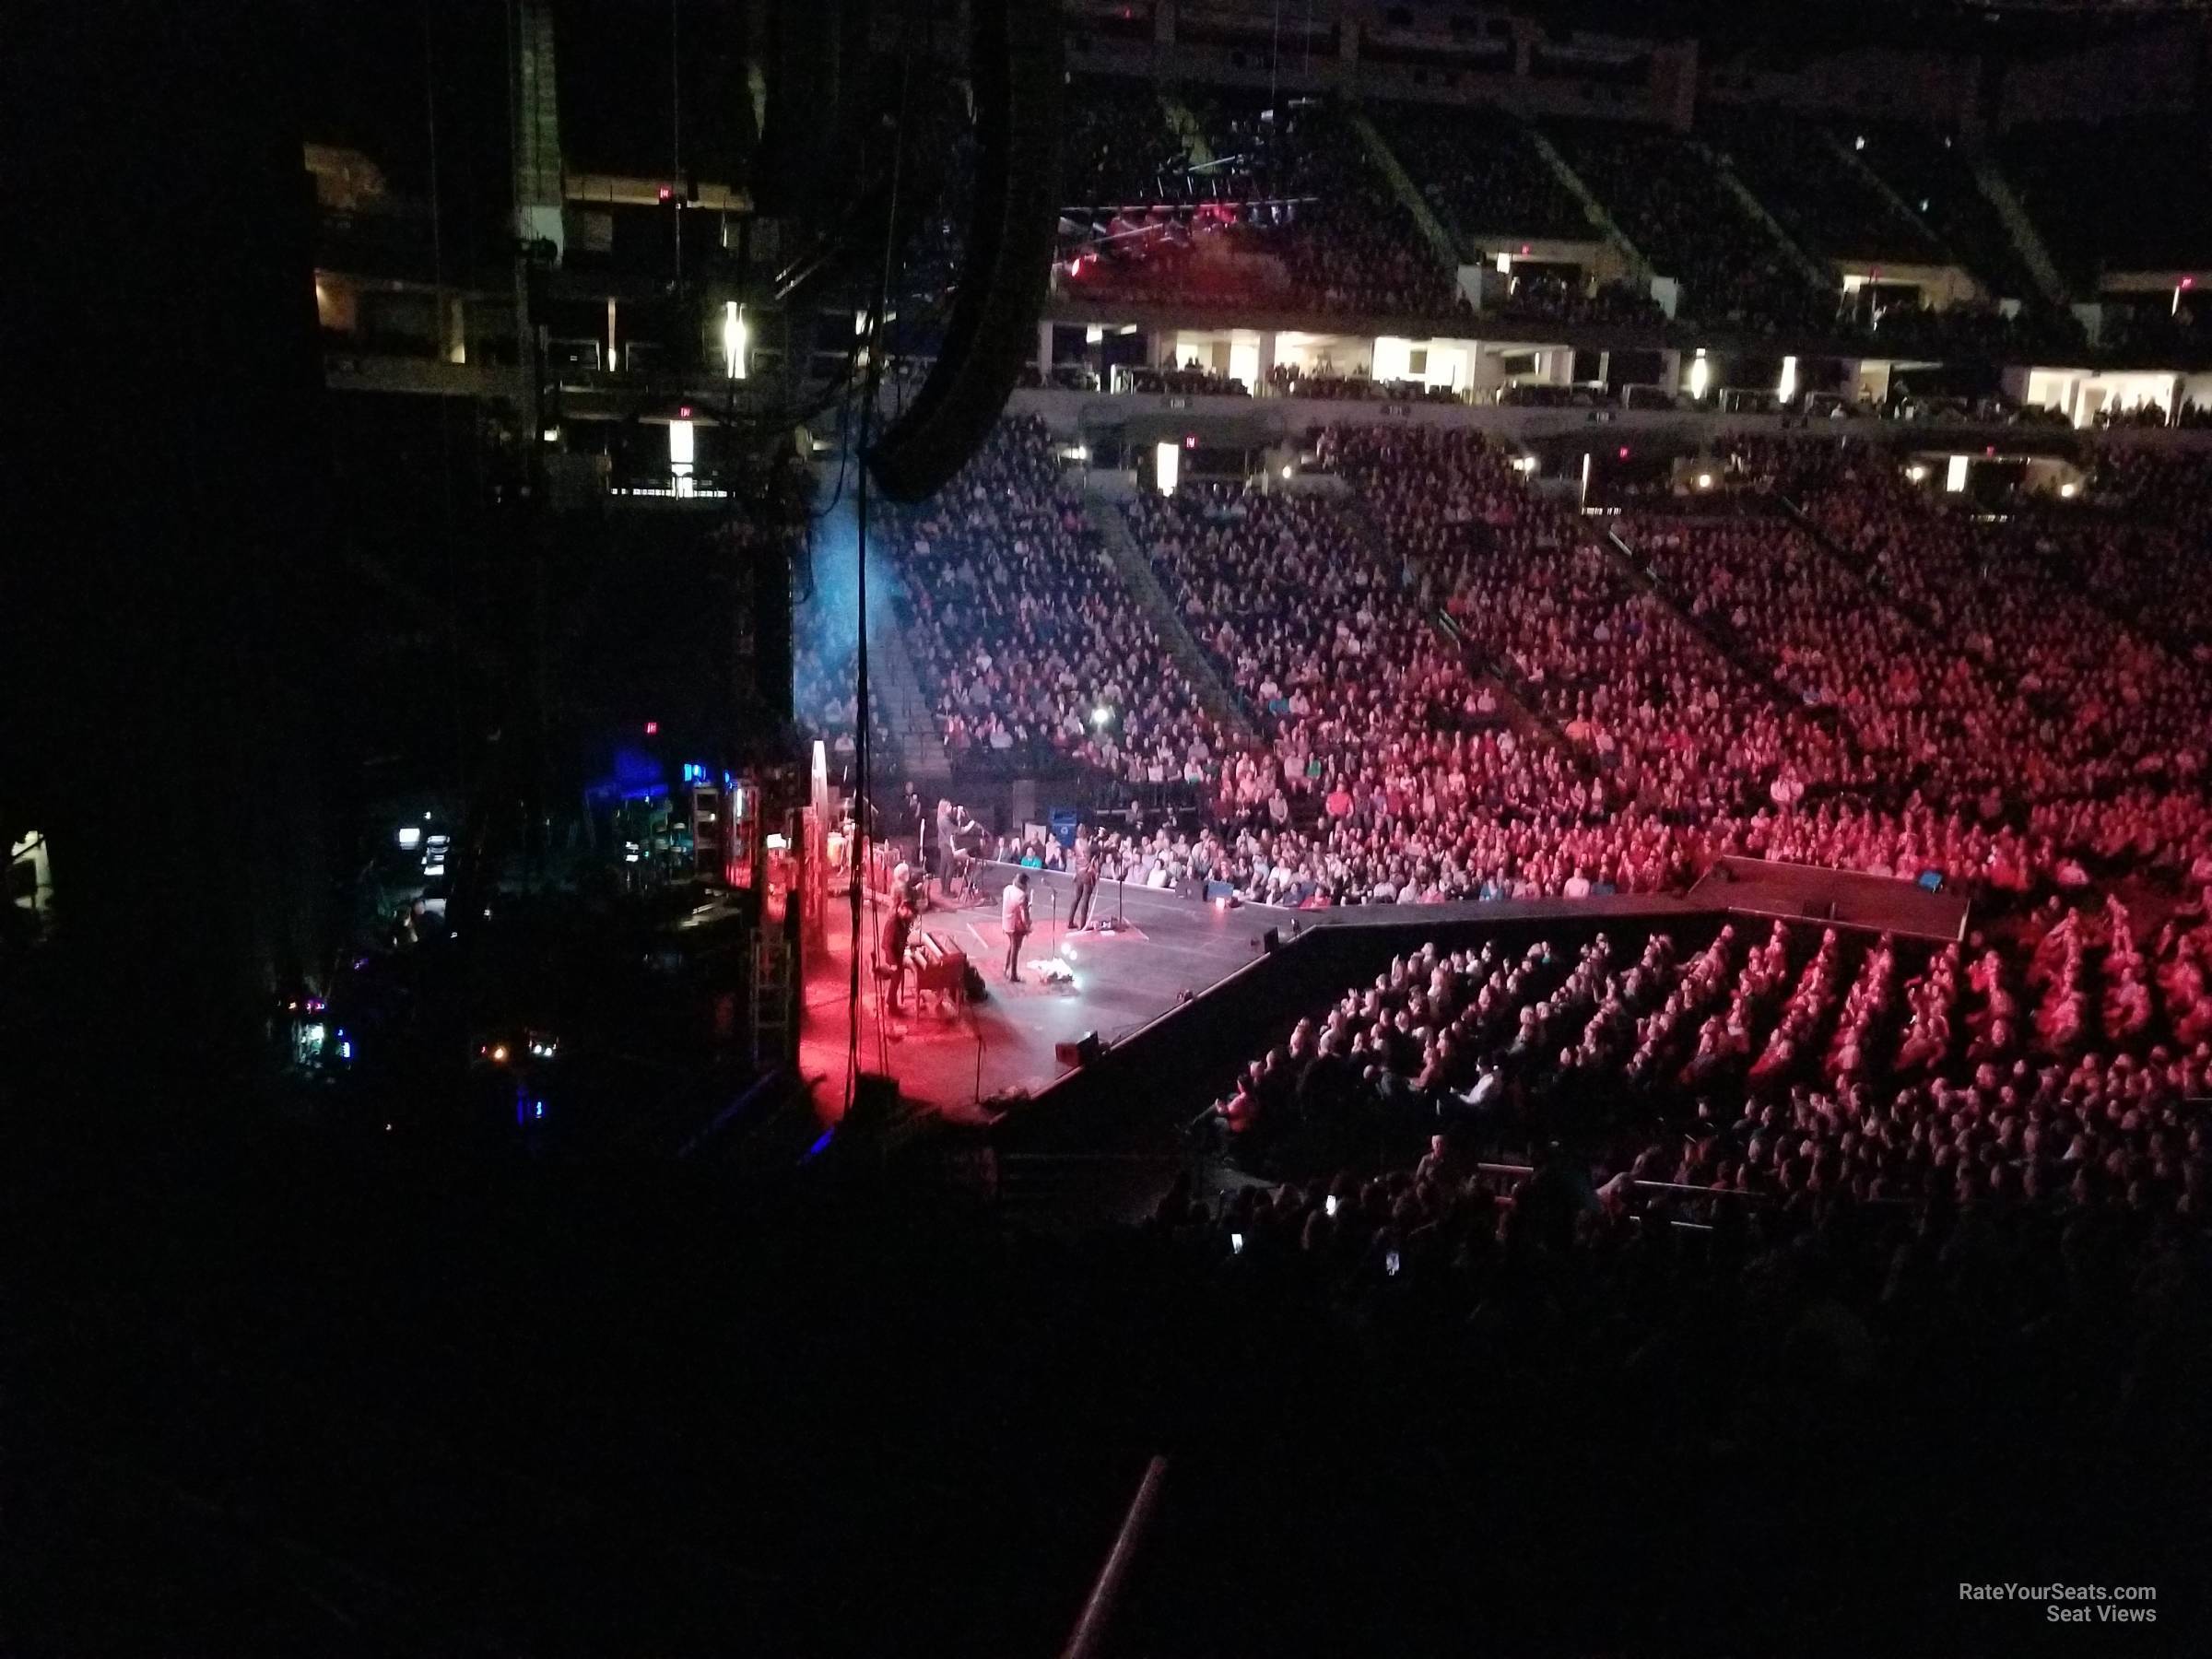 Section 116 at Target Center for Concerts - RateYourSeats.com